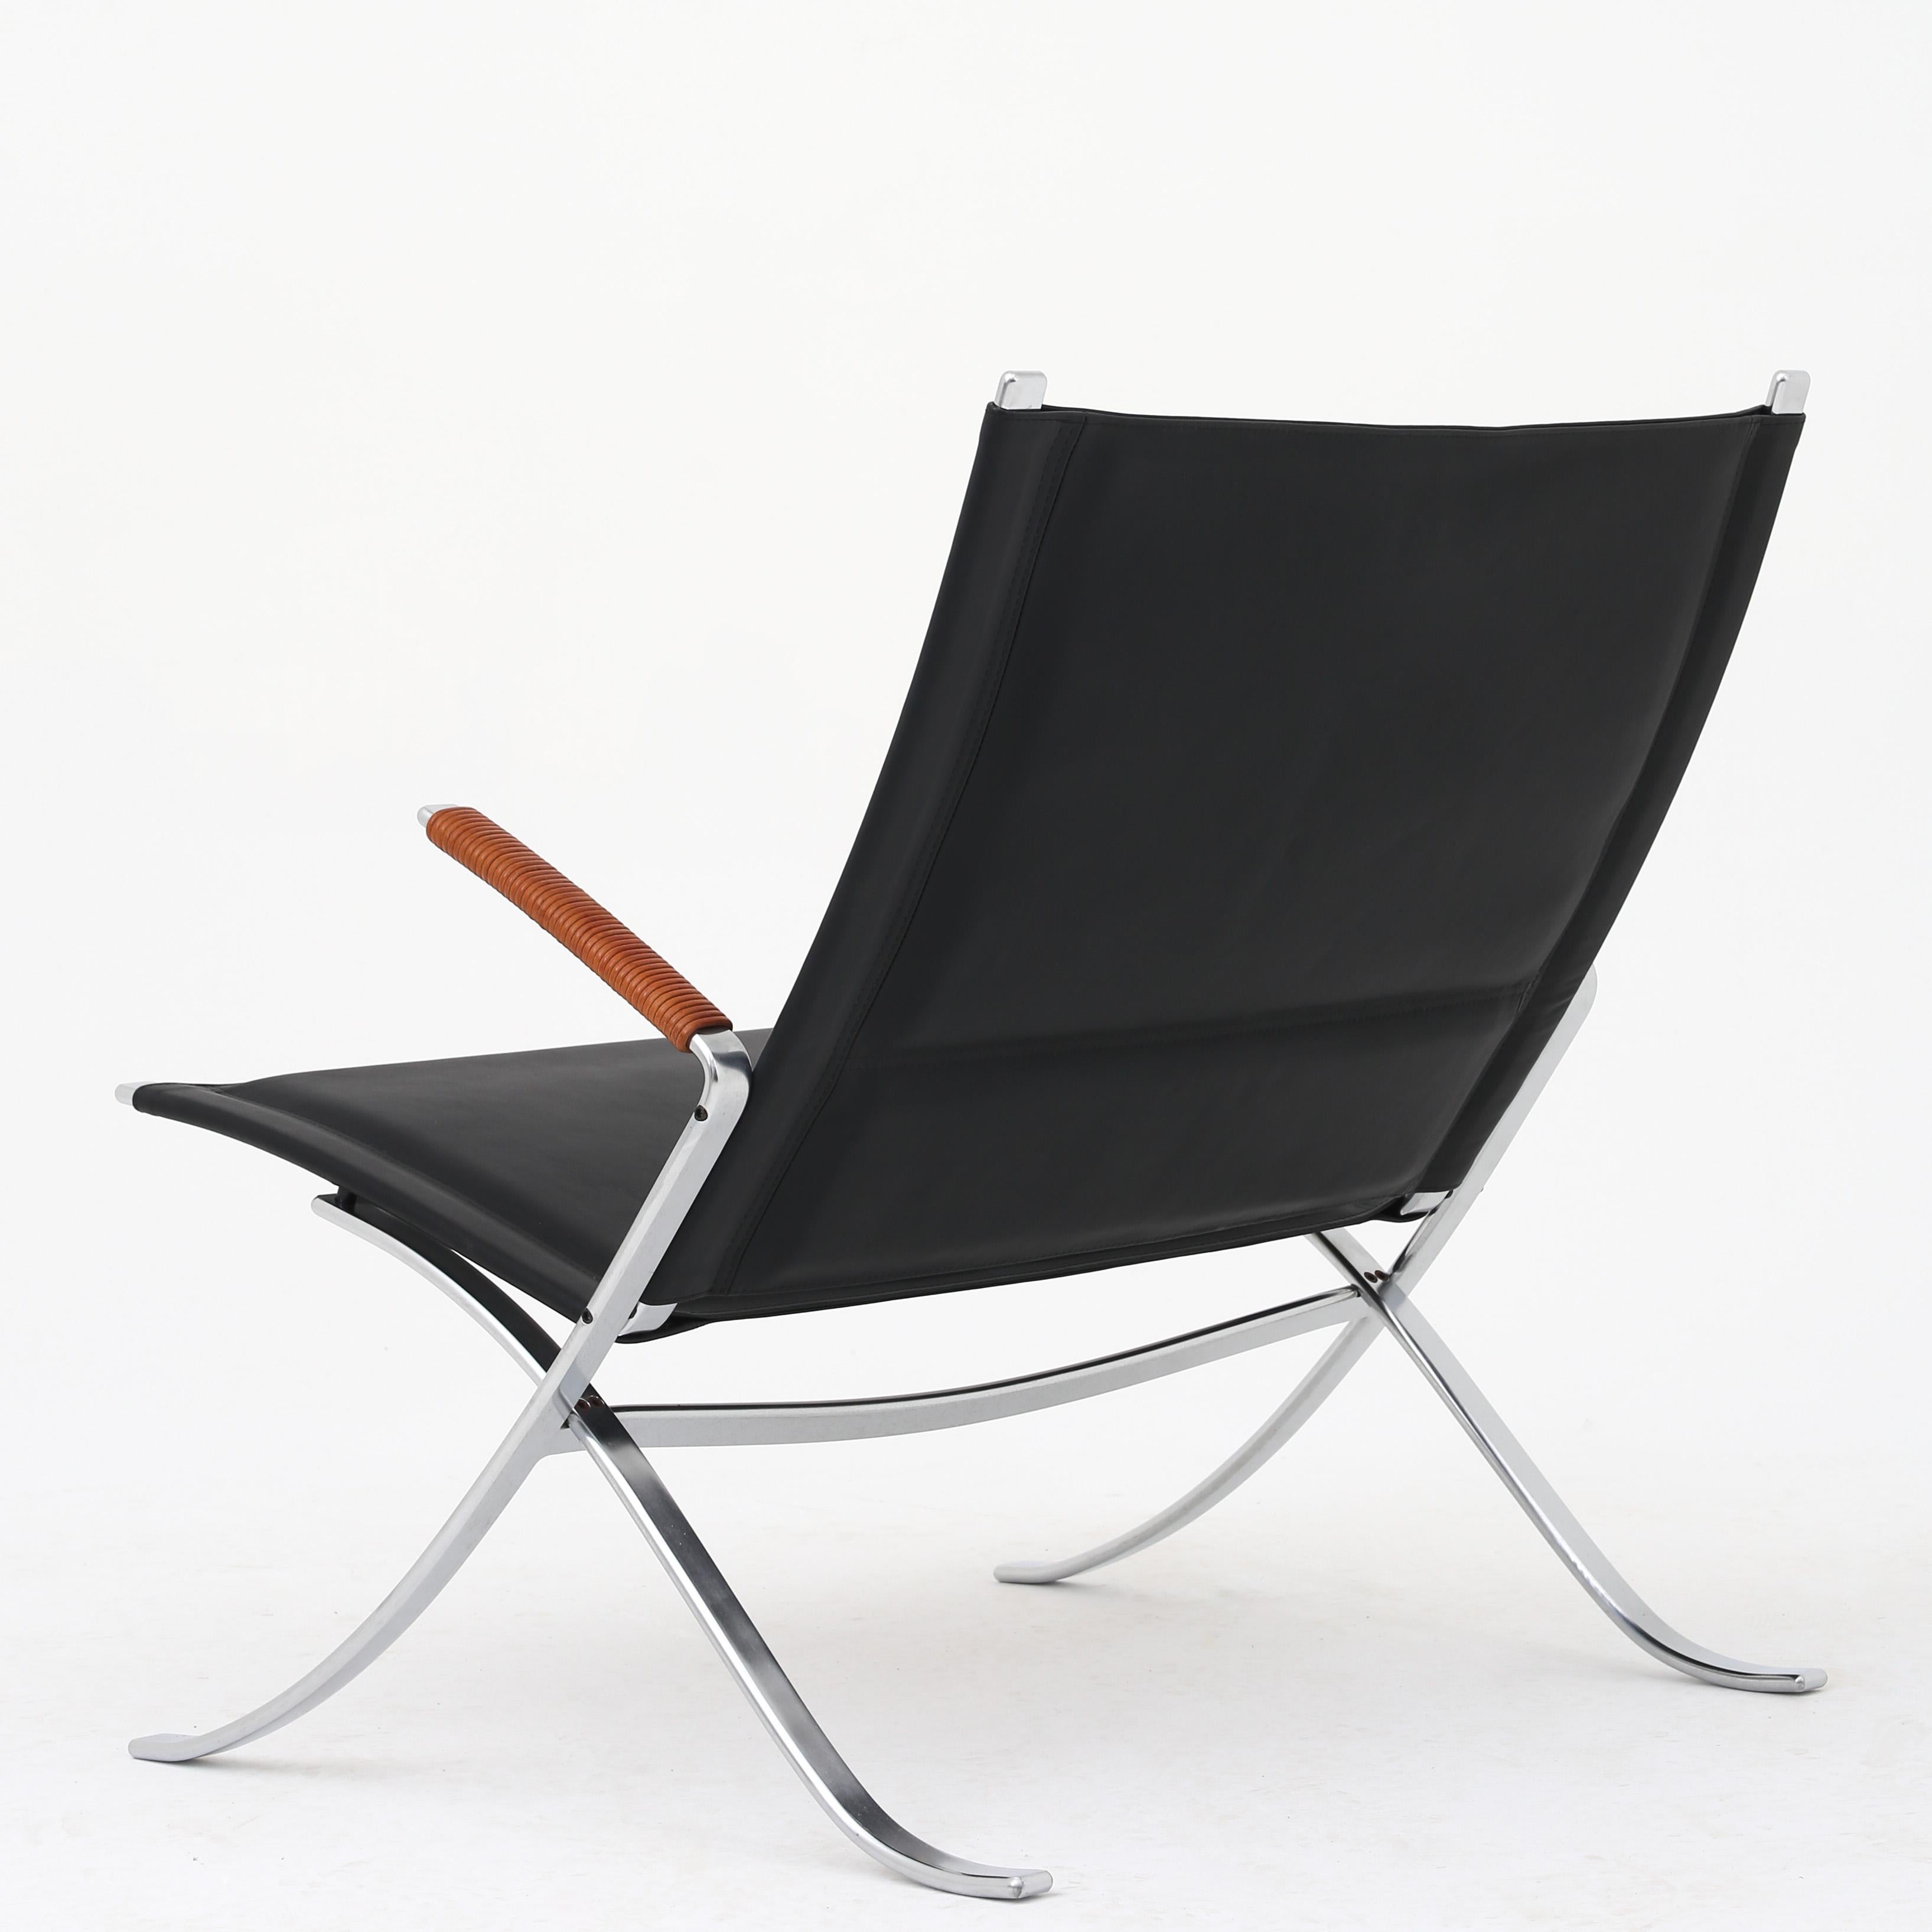 Preben Fabricius & Jørgen Kastholm FK 82 - 'X Chair' easy chair in black leather, chrome-plated steel and wrapped natural leather. Maker Lange Production.